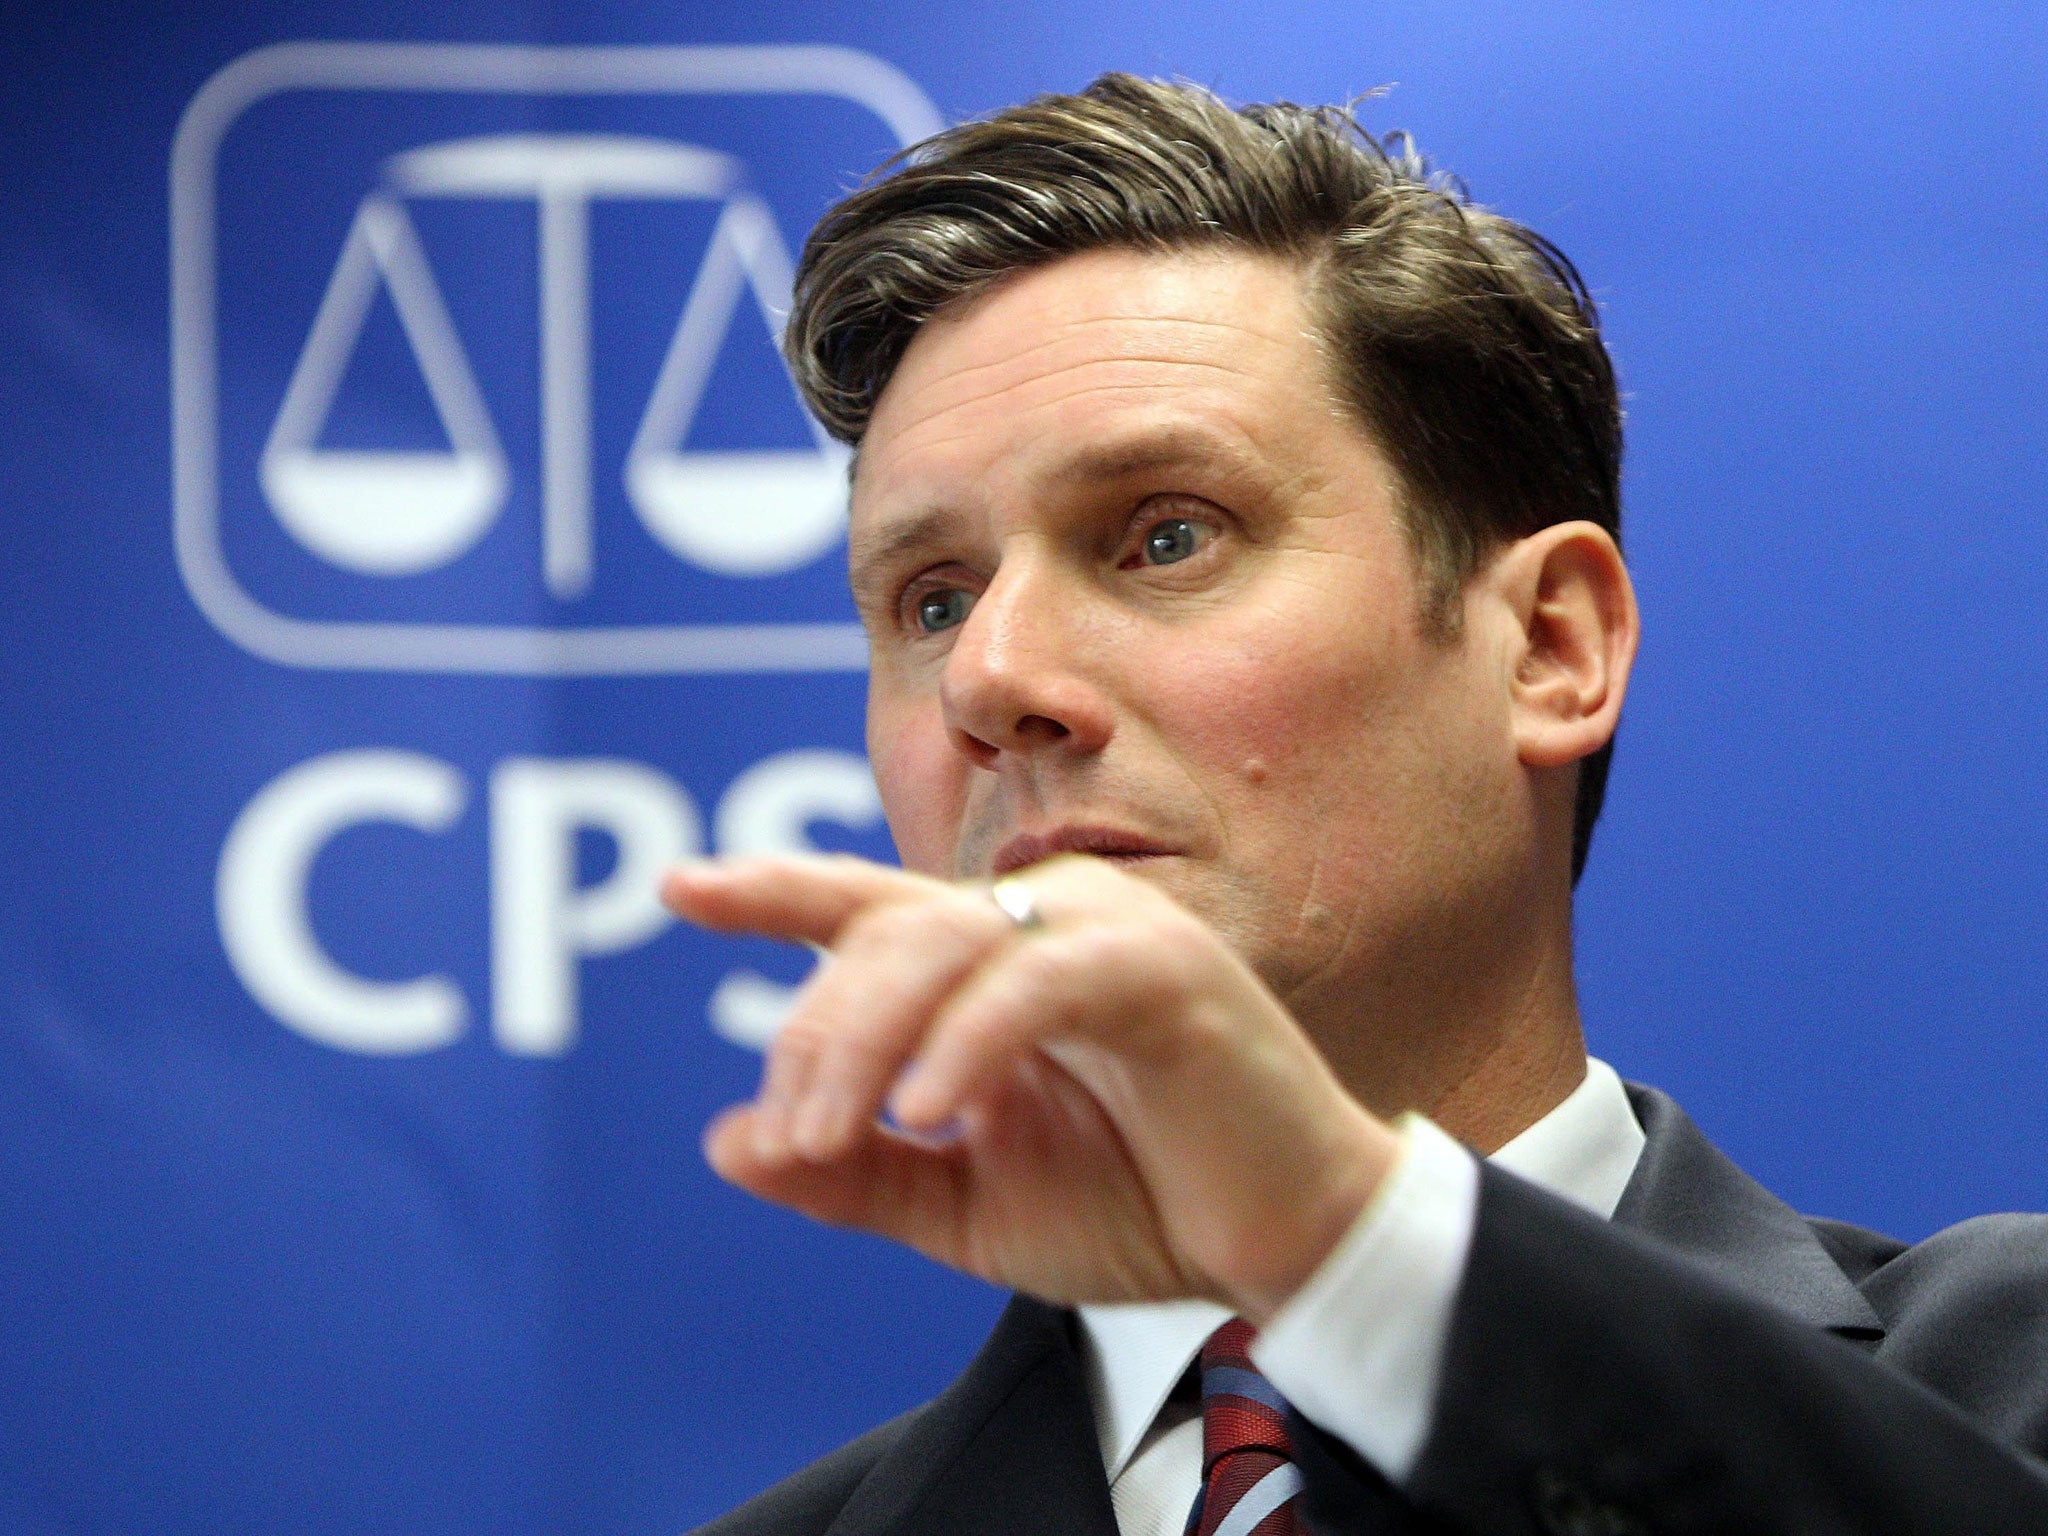 Mr Starmer stood down last month and has gone back to private practice